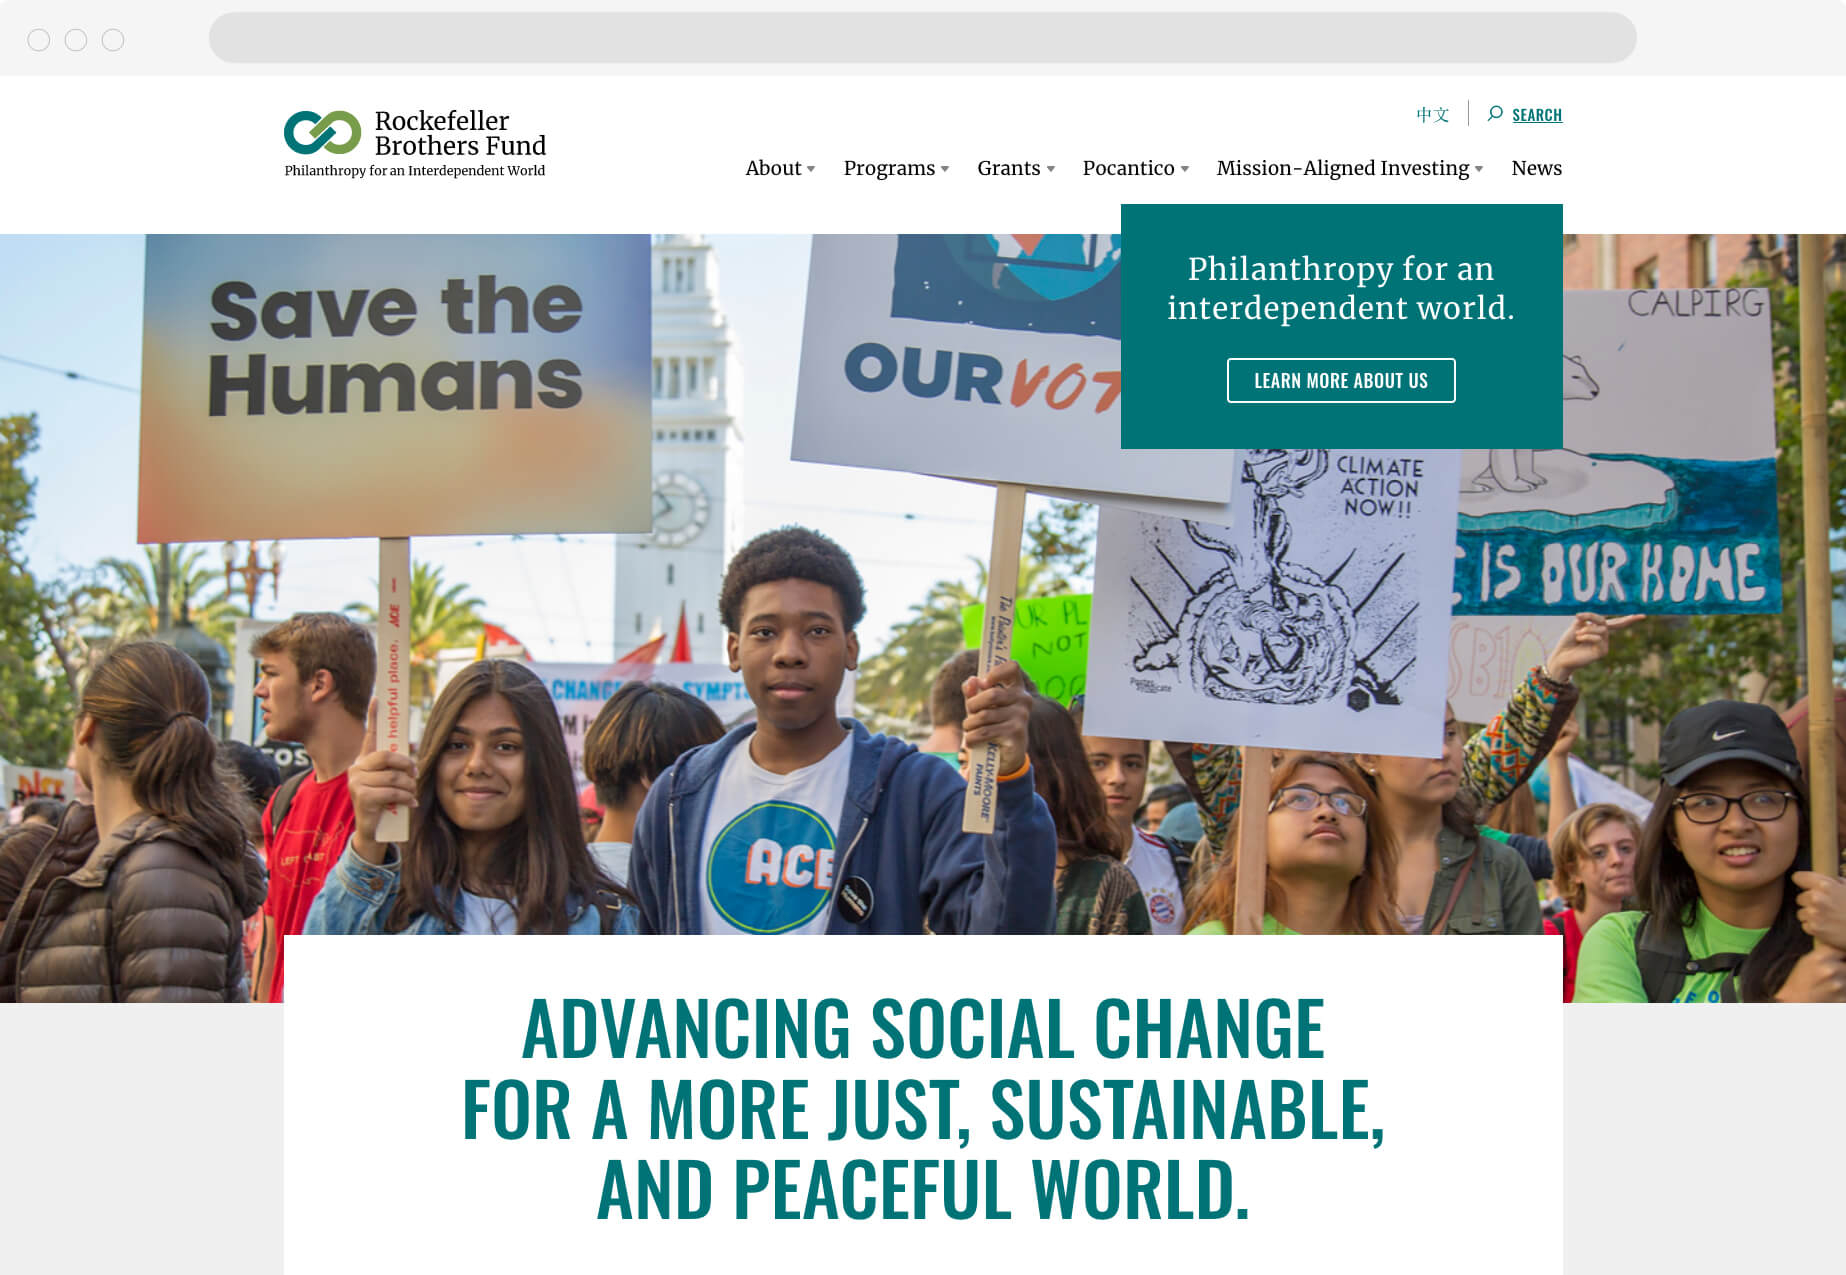 A homepage with a large hero image of a group of people holding up signs and protesting and the words "Advancing social change for a more just, sustainable, and peaceful world"